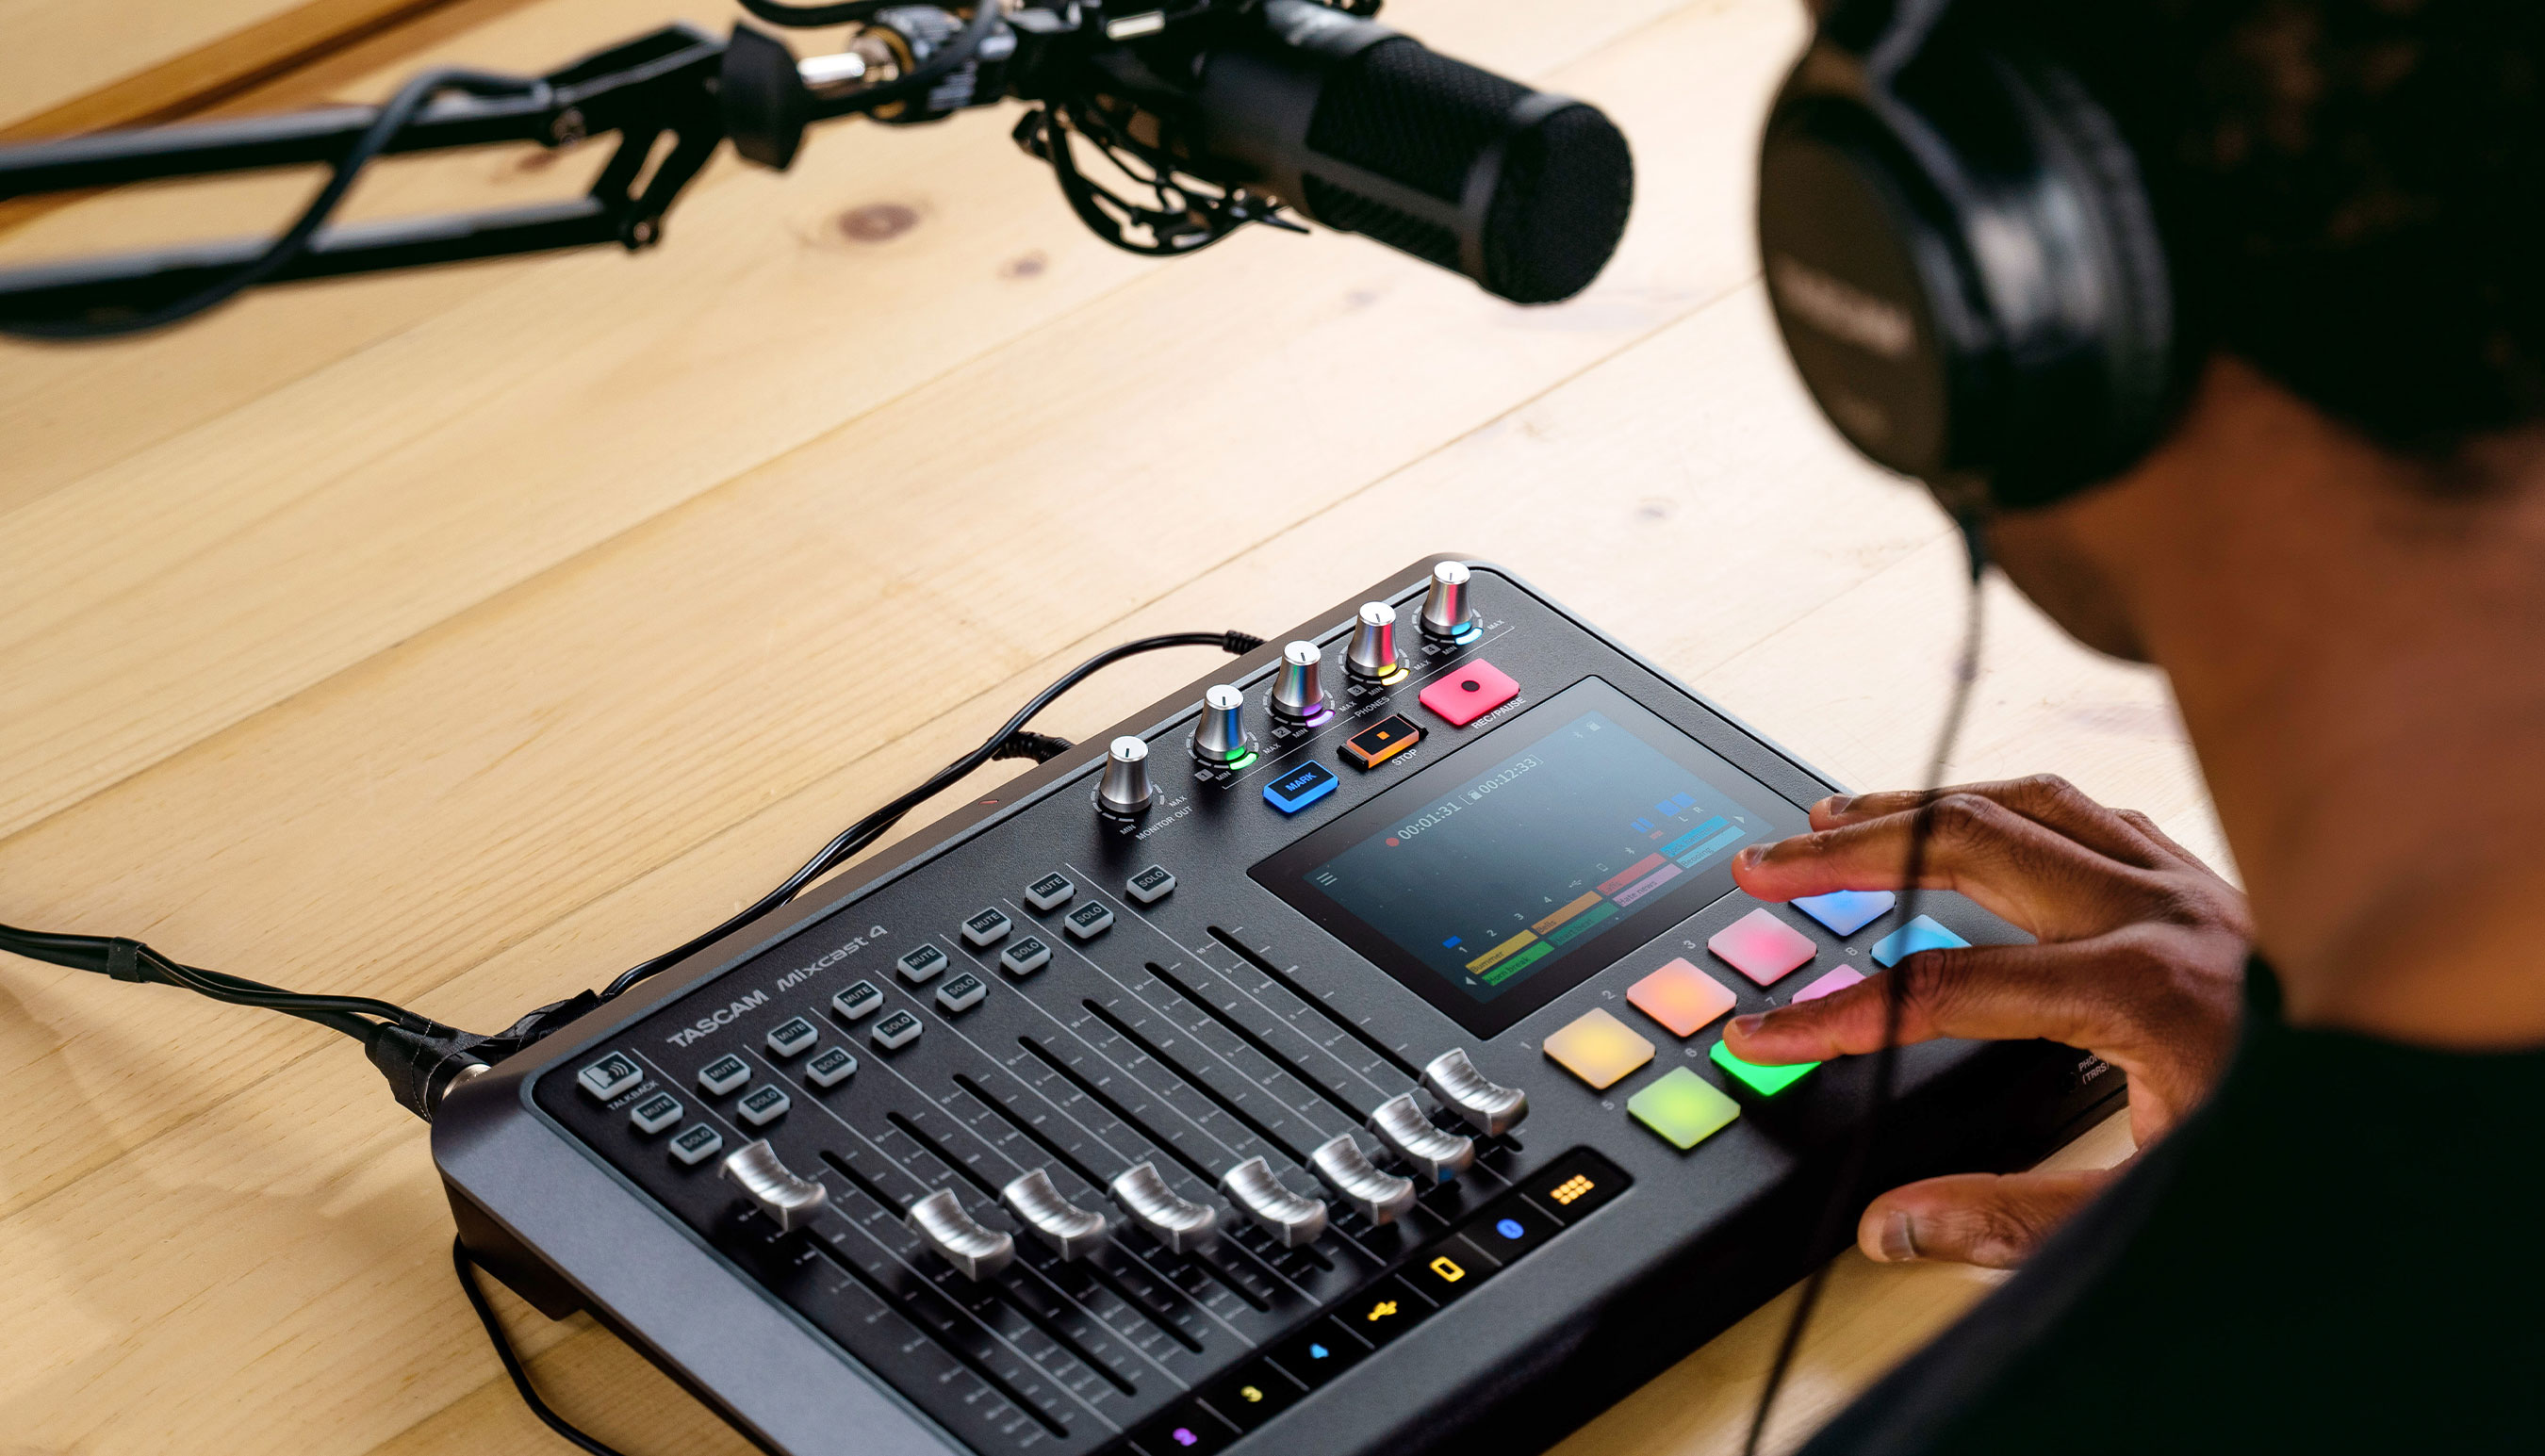 With four microphone channels, the Mixcast 4 can feature a microphone plugged into the front or back for the first input, plus three additional channels for guests or co-hosts.